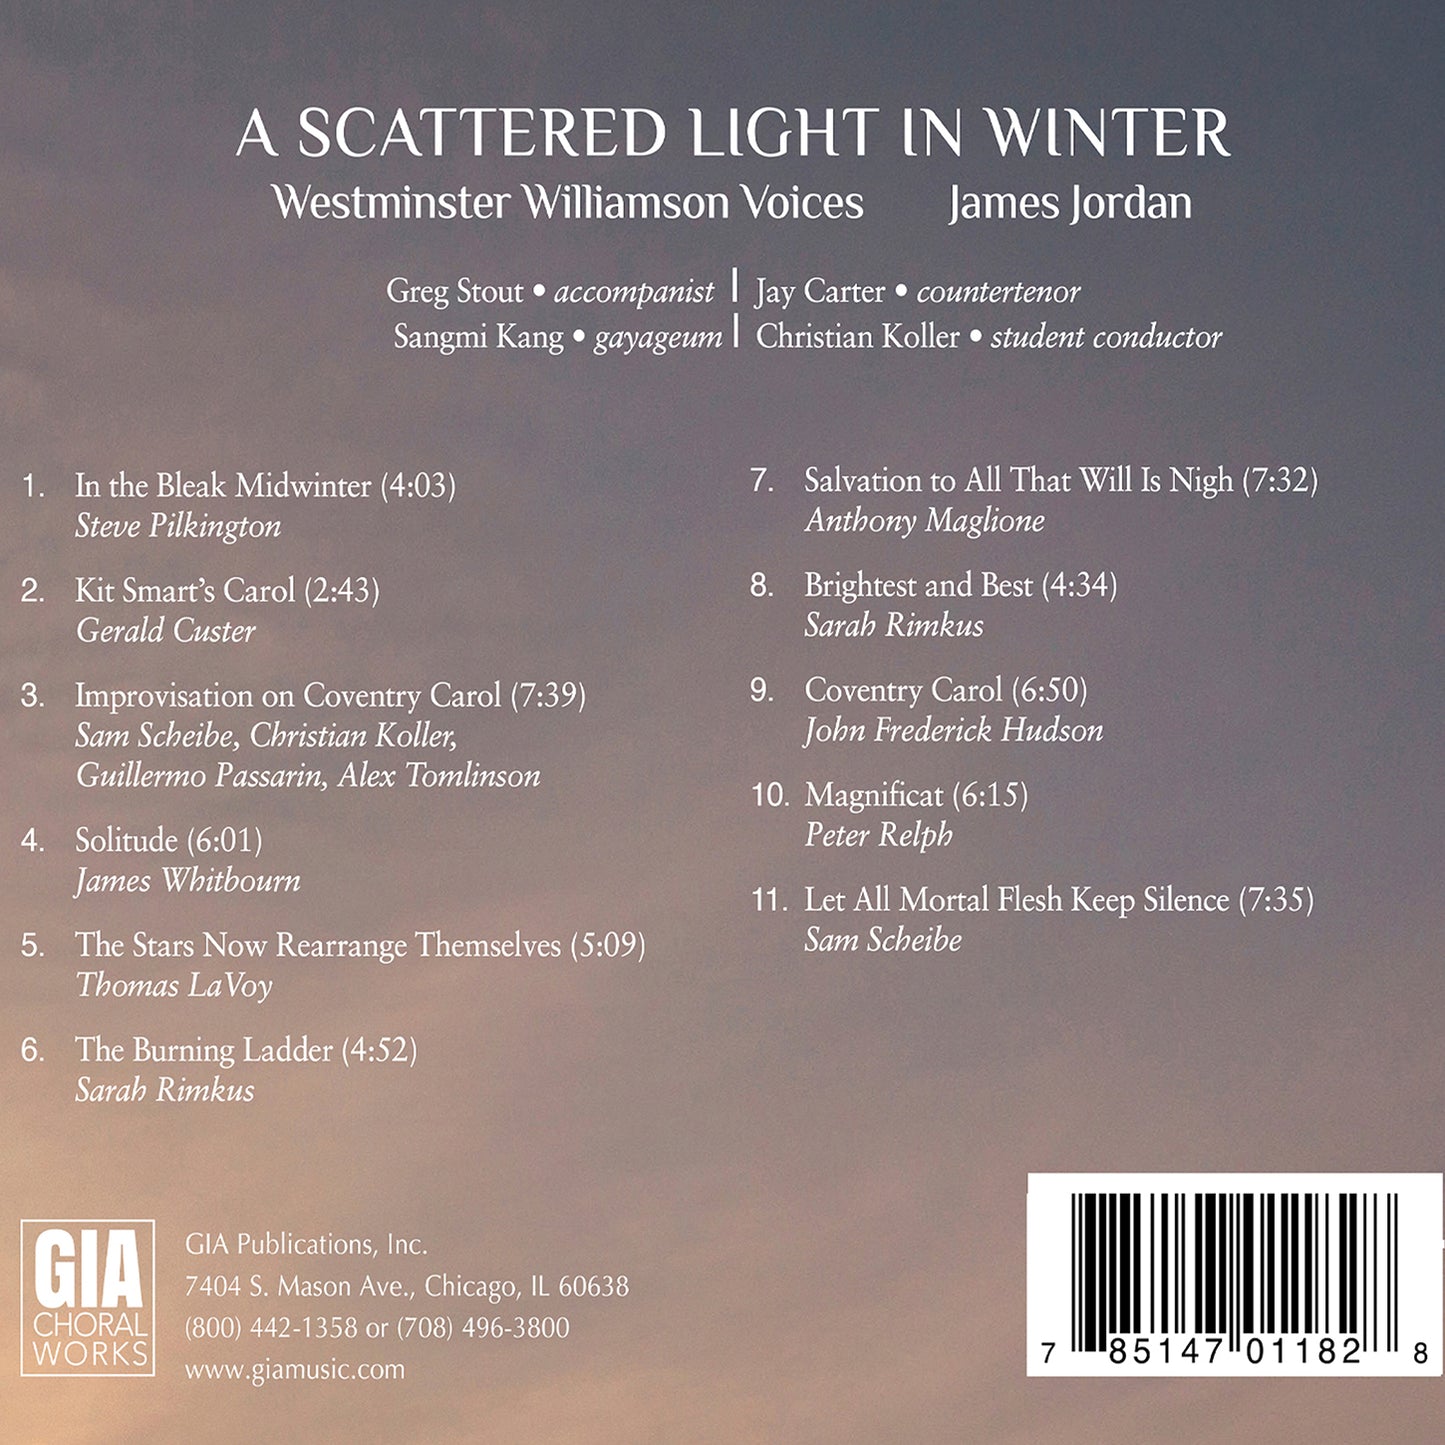 A Scattered Light in Winter / Westminster Williamson Voices